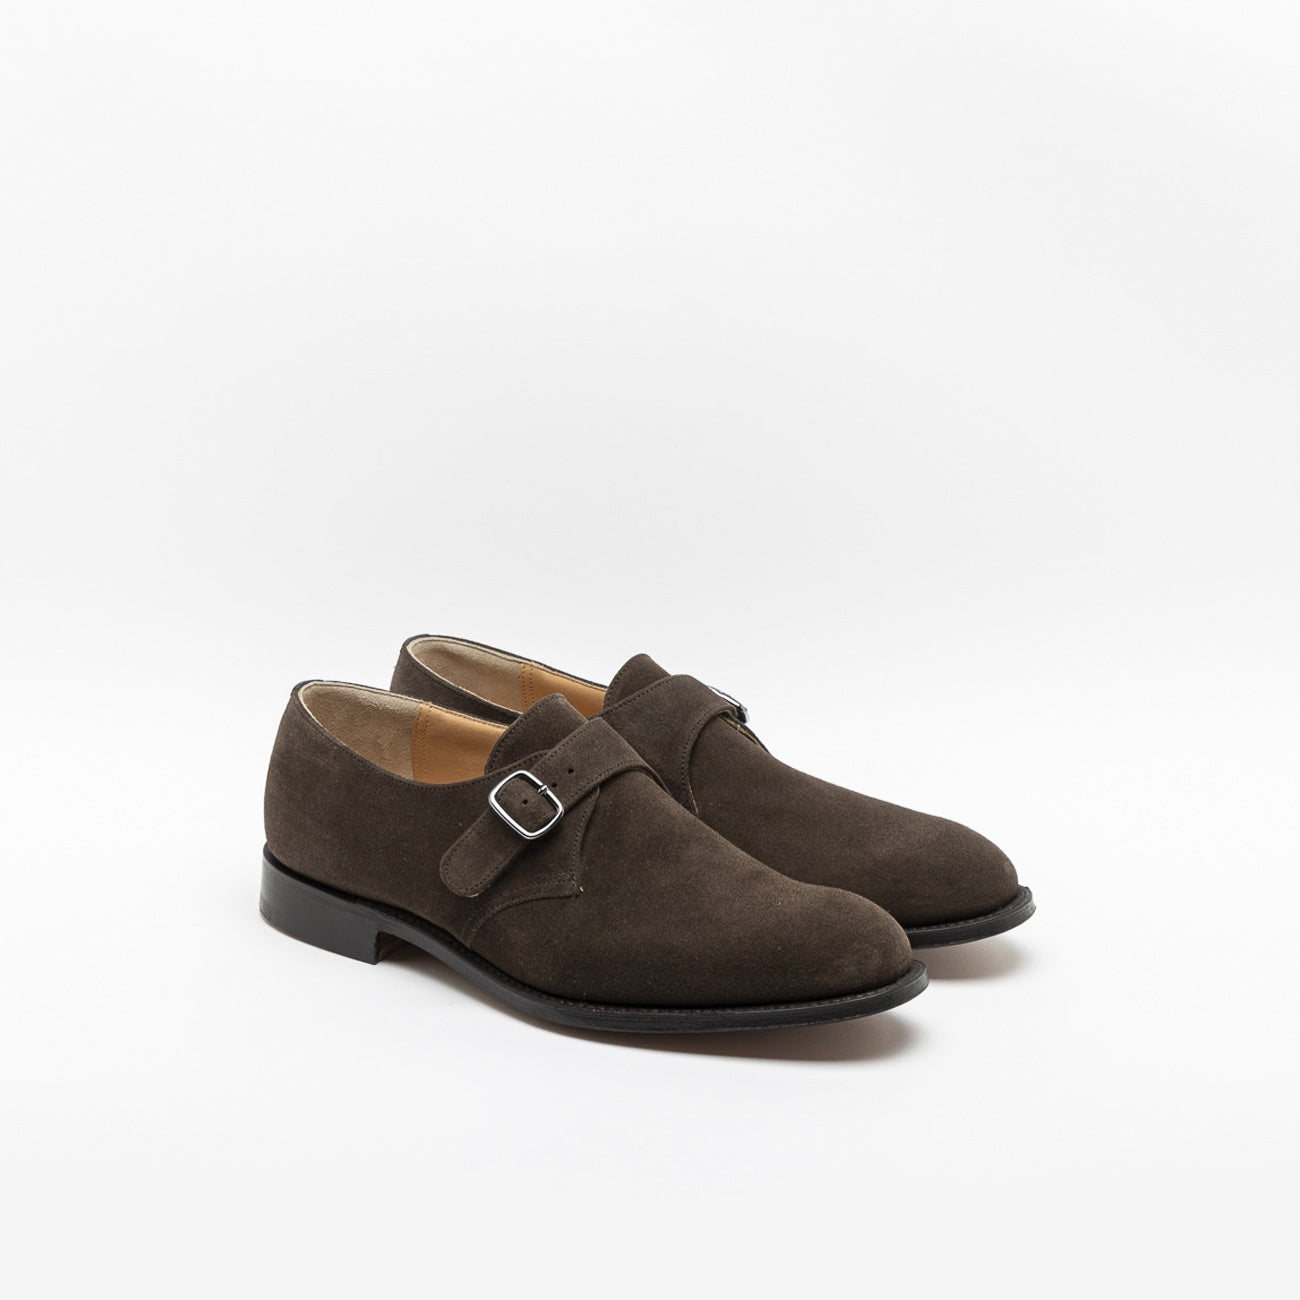 Church's Becket 173 single buckle in brown suede